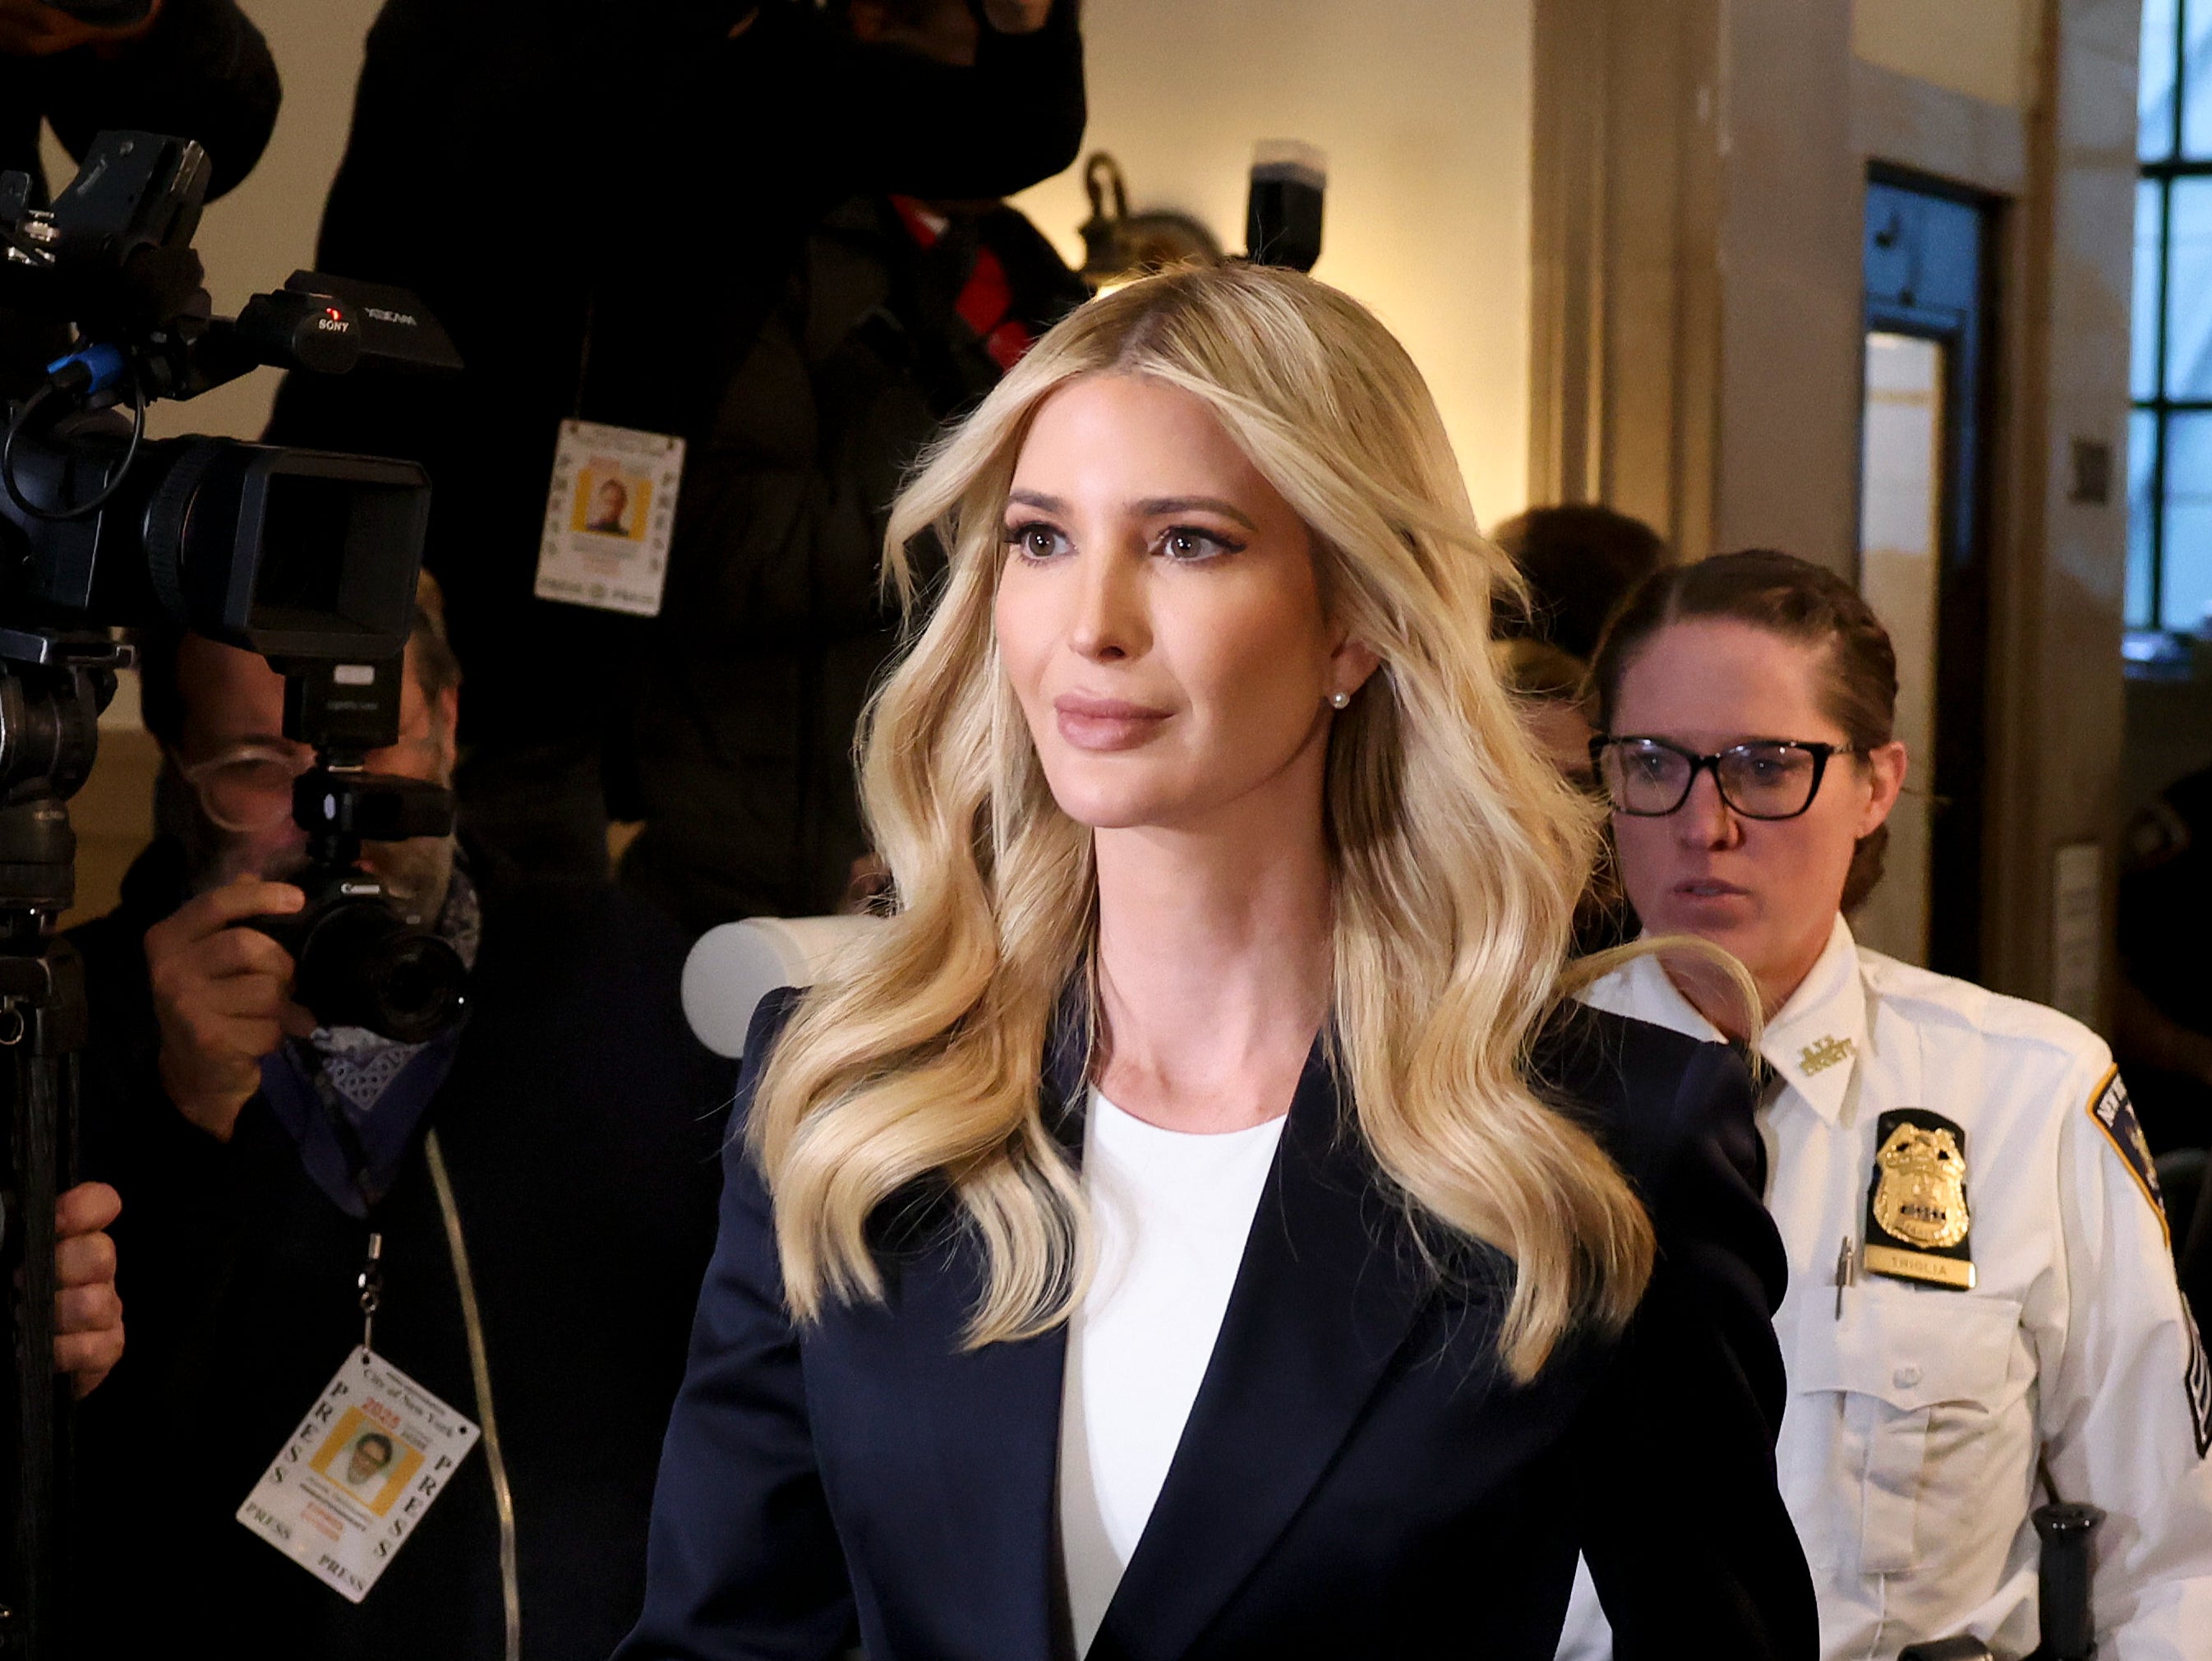 Ivanka Trump responded to the princess’ Instagram post in which she announced her cancer diagnosis